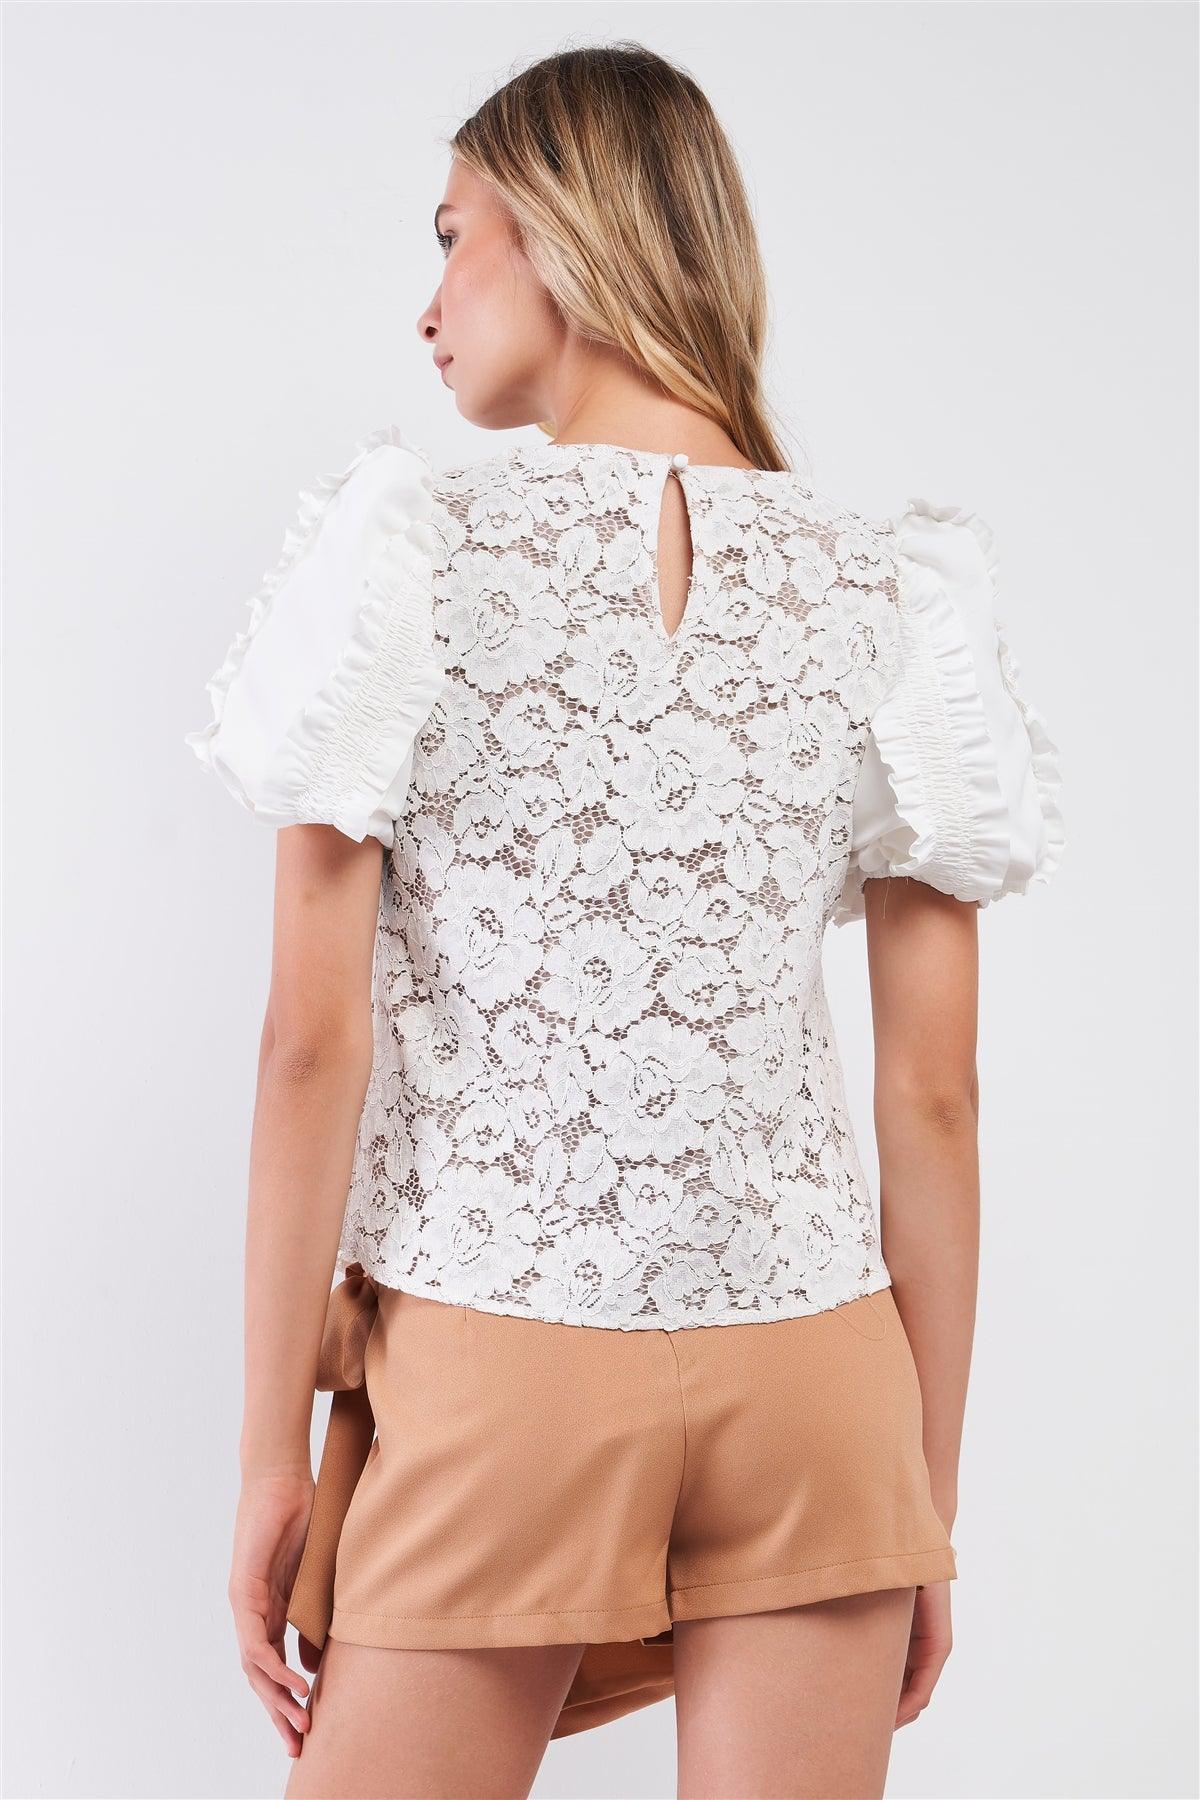 White & Nude Floral Crochet Ruffle Trim Puff Sleeve Top /2-2-2